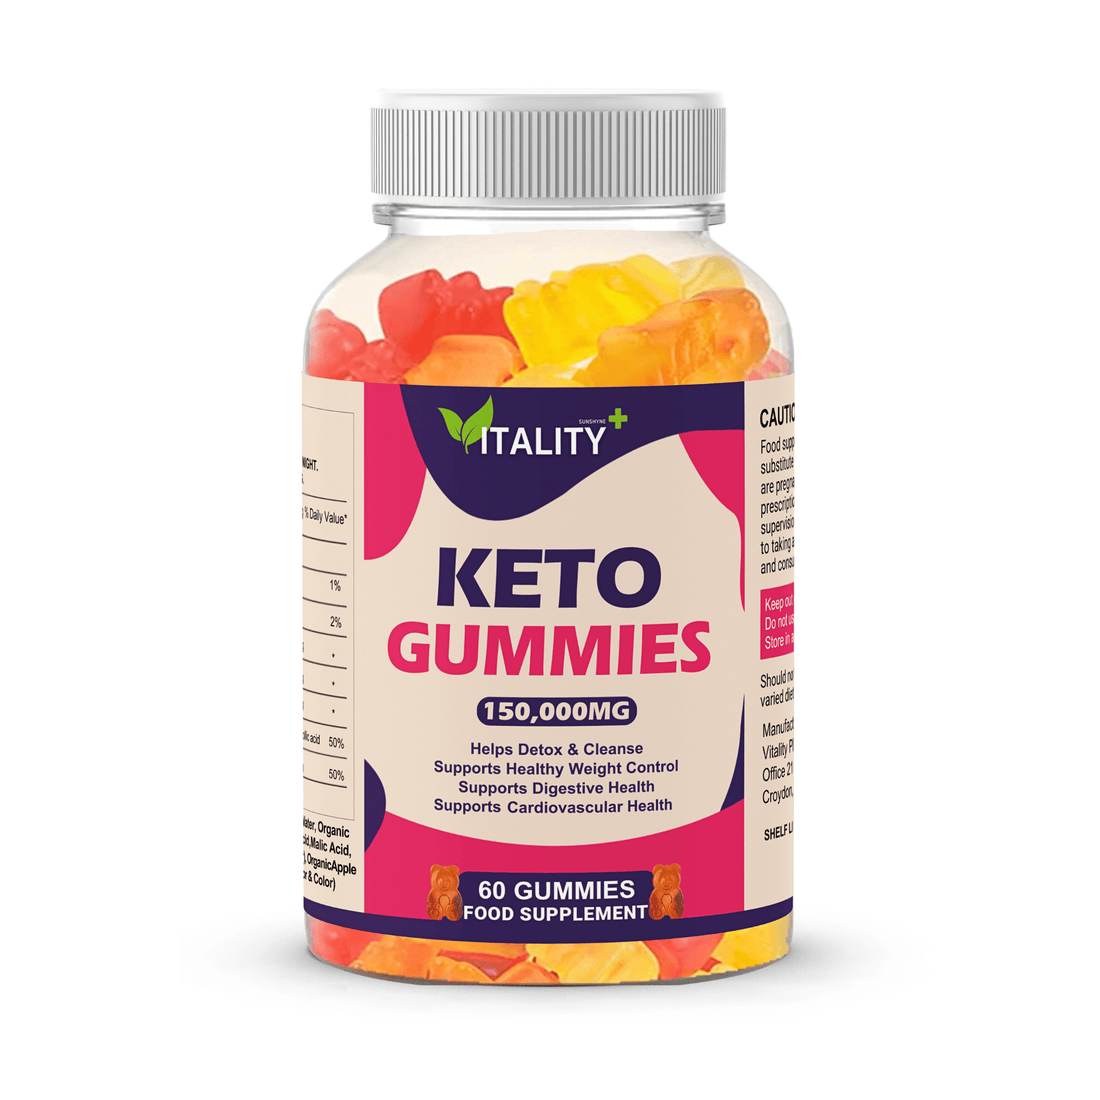 Keto Gummies with Apple Cider Vinegar: A Delicious Snack for Your Weight Loss Journey - Vitality Supplements